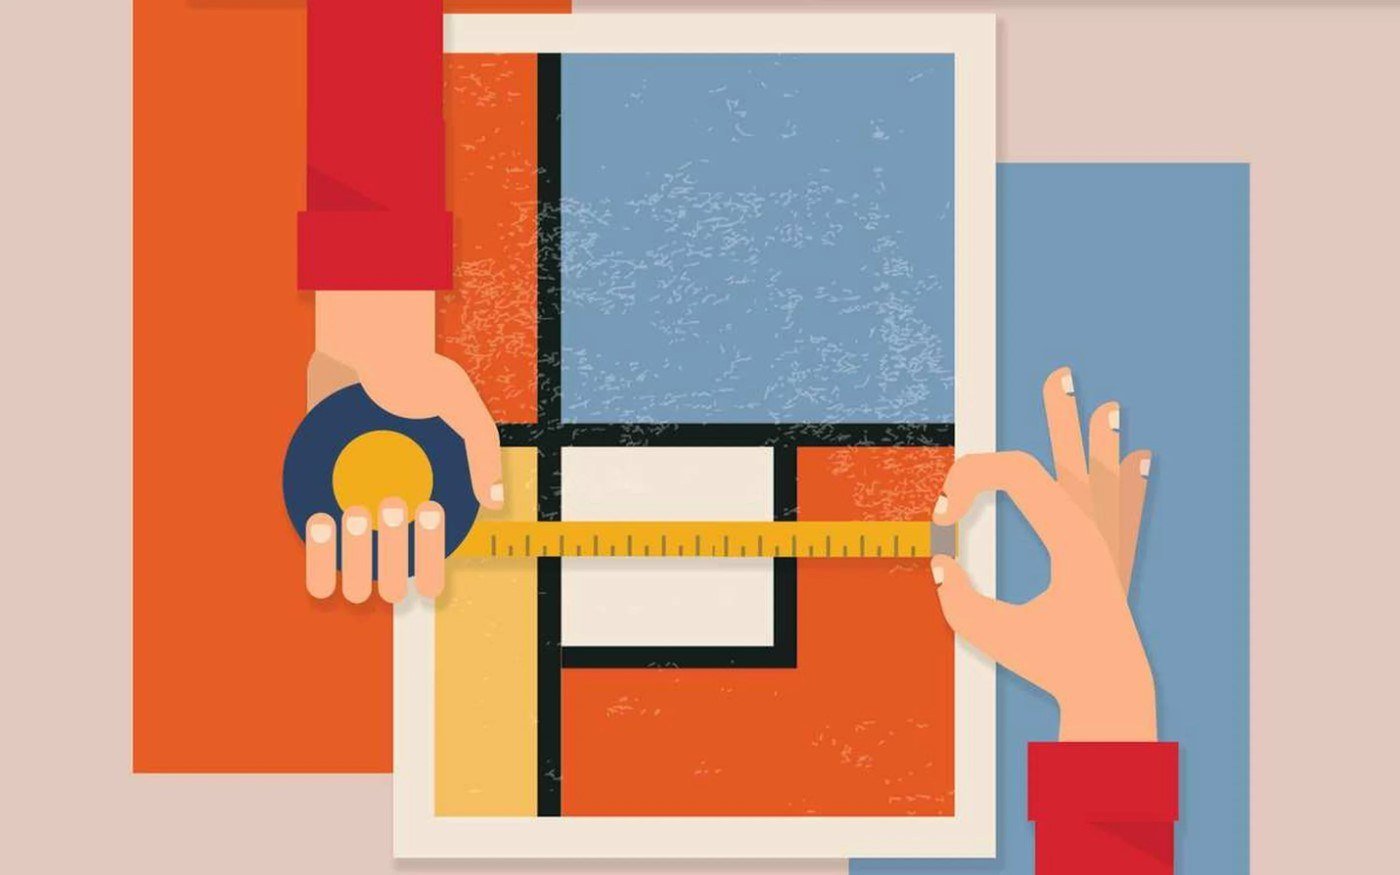 hands to measure poster sizes